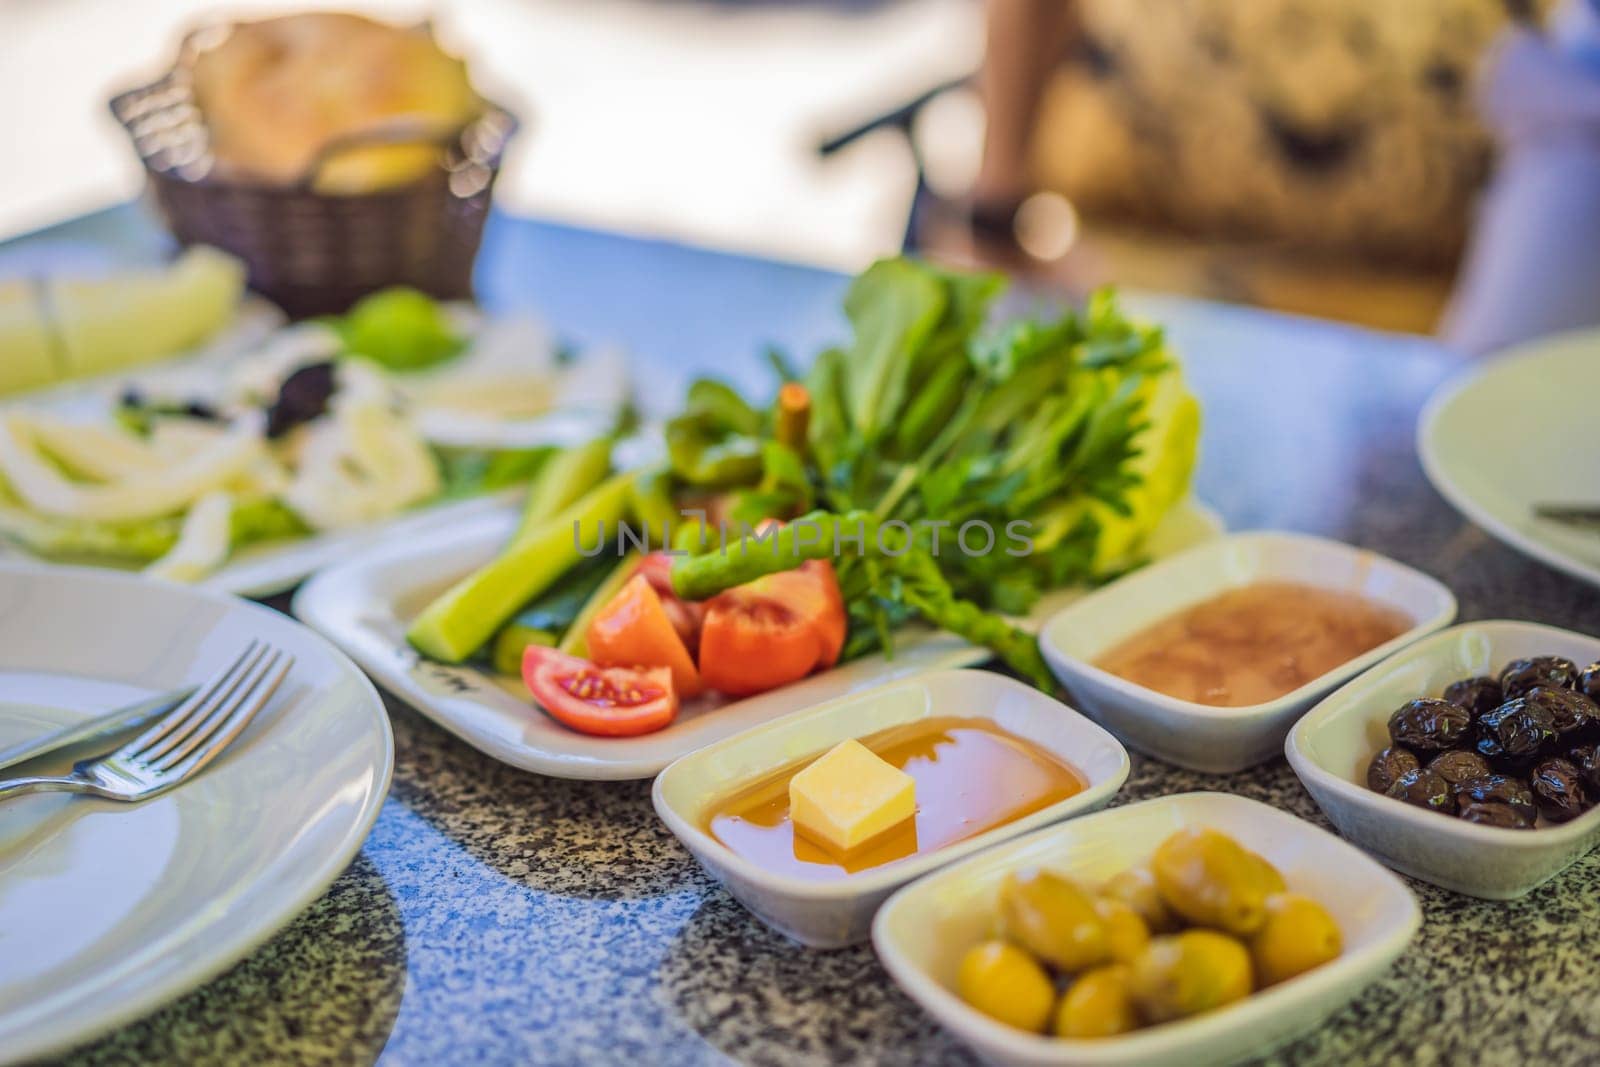 Turkish breakfast table. Pastries, vegetables, greens, olives, cheeses, fried eggs, spices, jams, honey, tea in copper pot and tulip glasses, wide composition by galitskaya